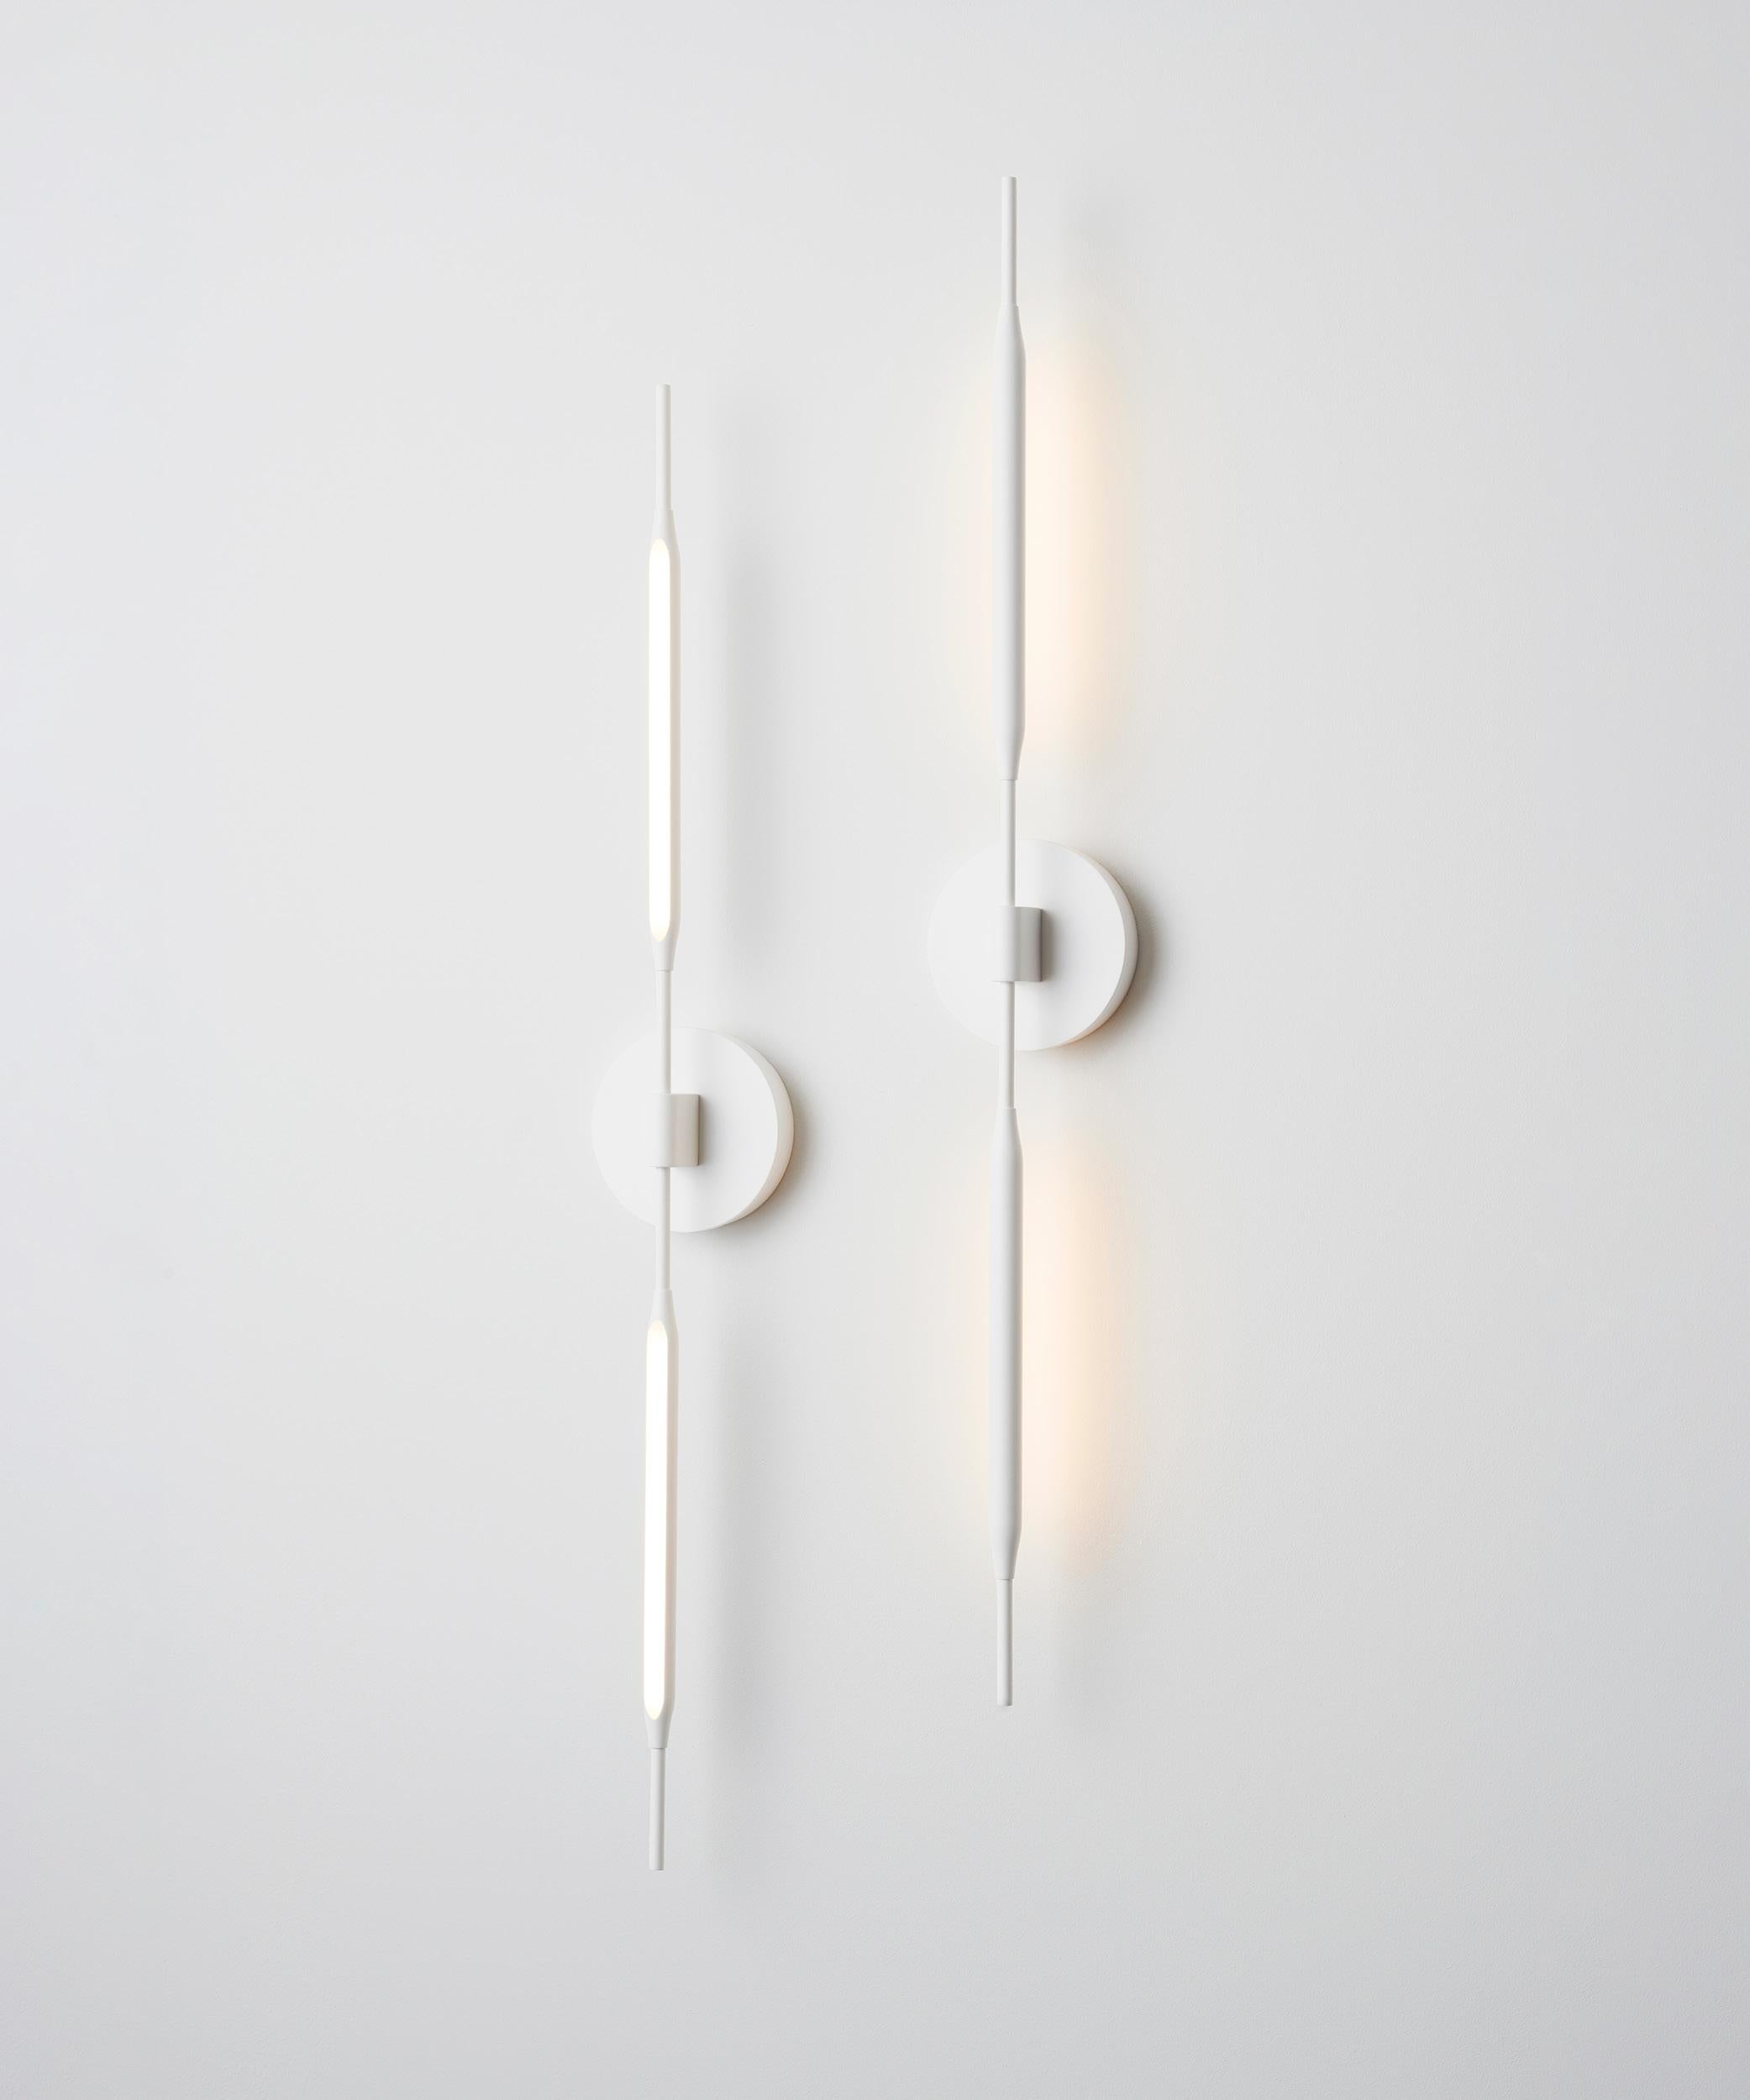 Inspired by slender, natural forms, the Reed Wall Lights are designed to deliver soft accents to an interior lighting scheme. Used in conjunction with the Reed portable luminaires, their versatility combines with a unique aesthetic. Precision